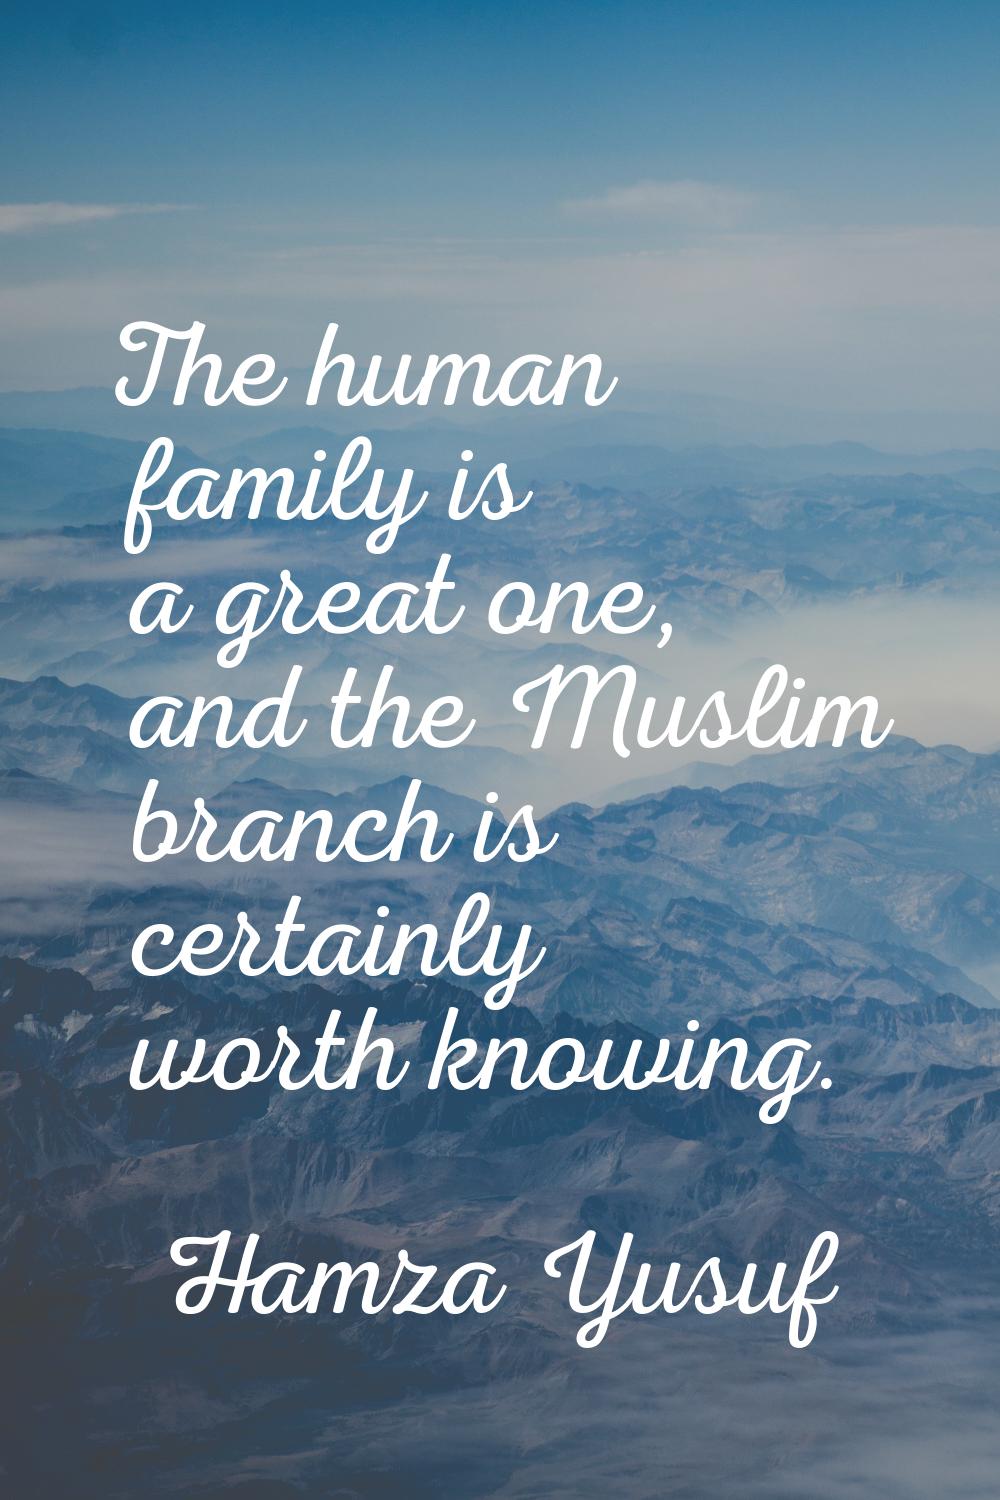 The human family is a great one, and the Muslim branch is certainly worth knowing.